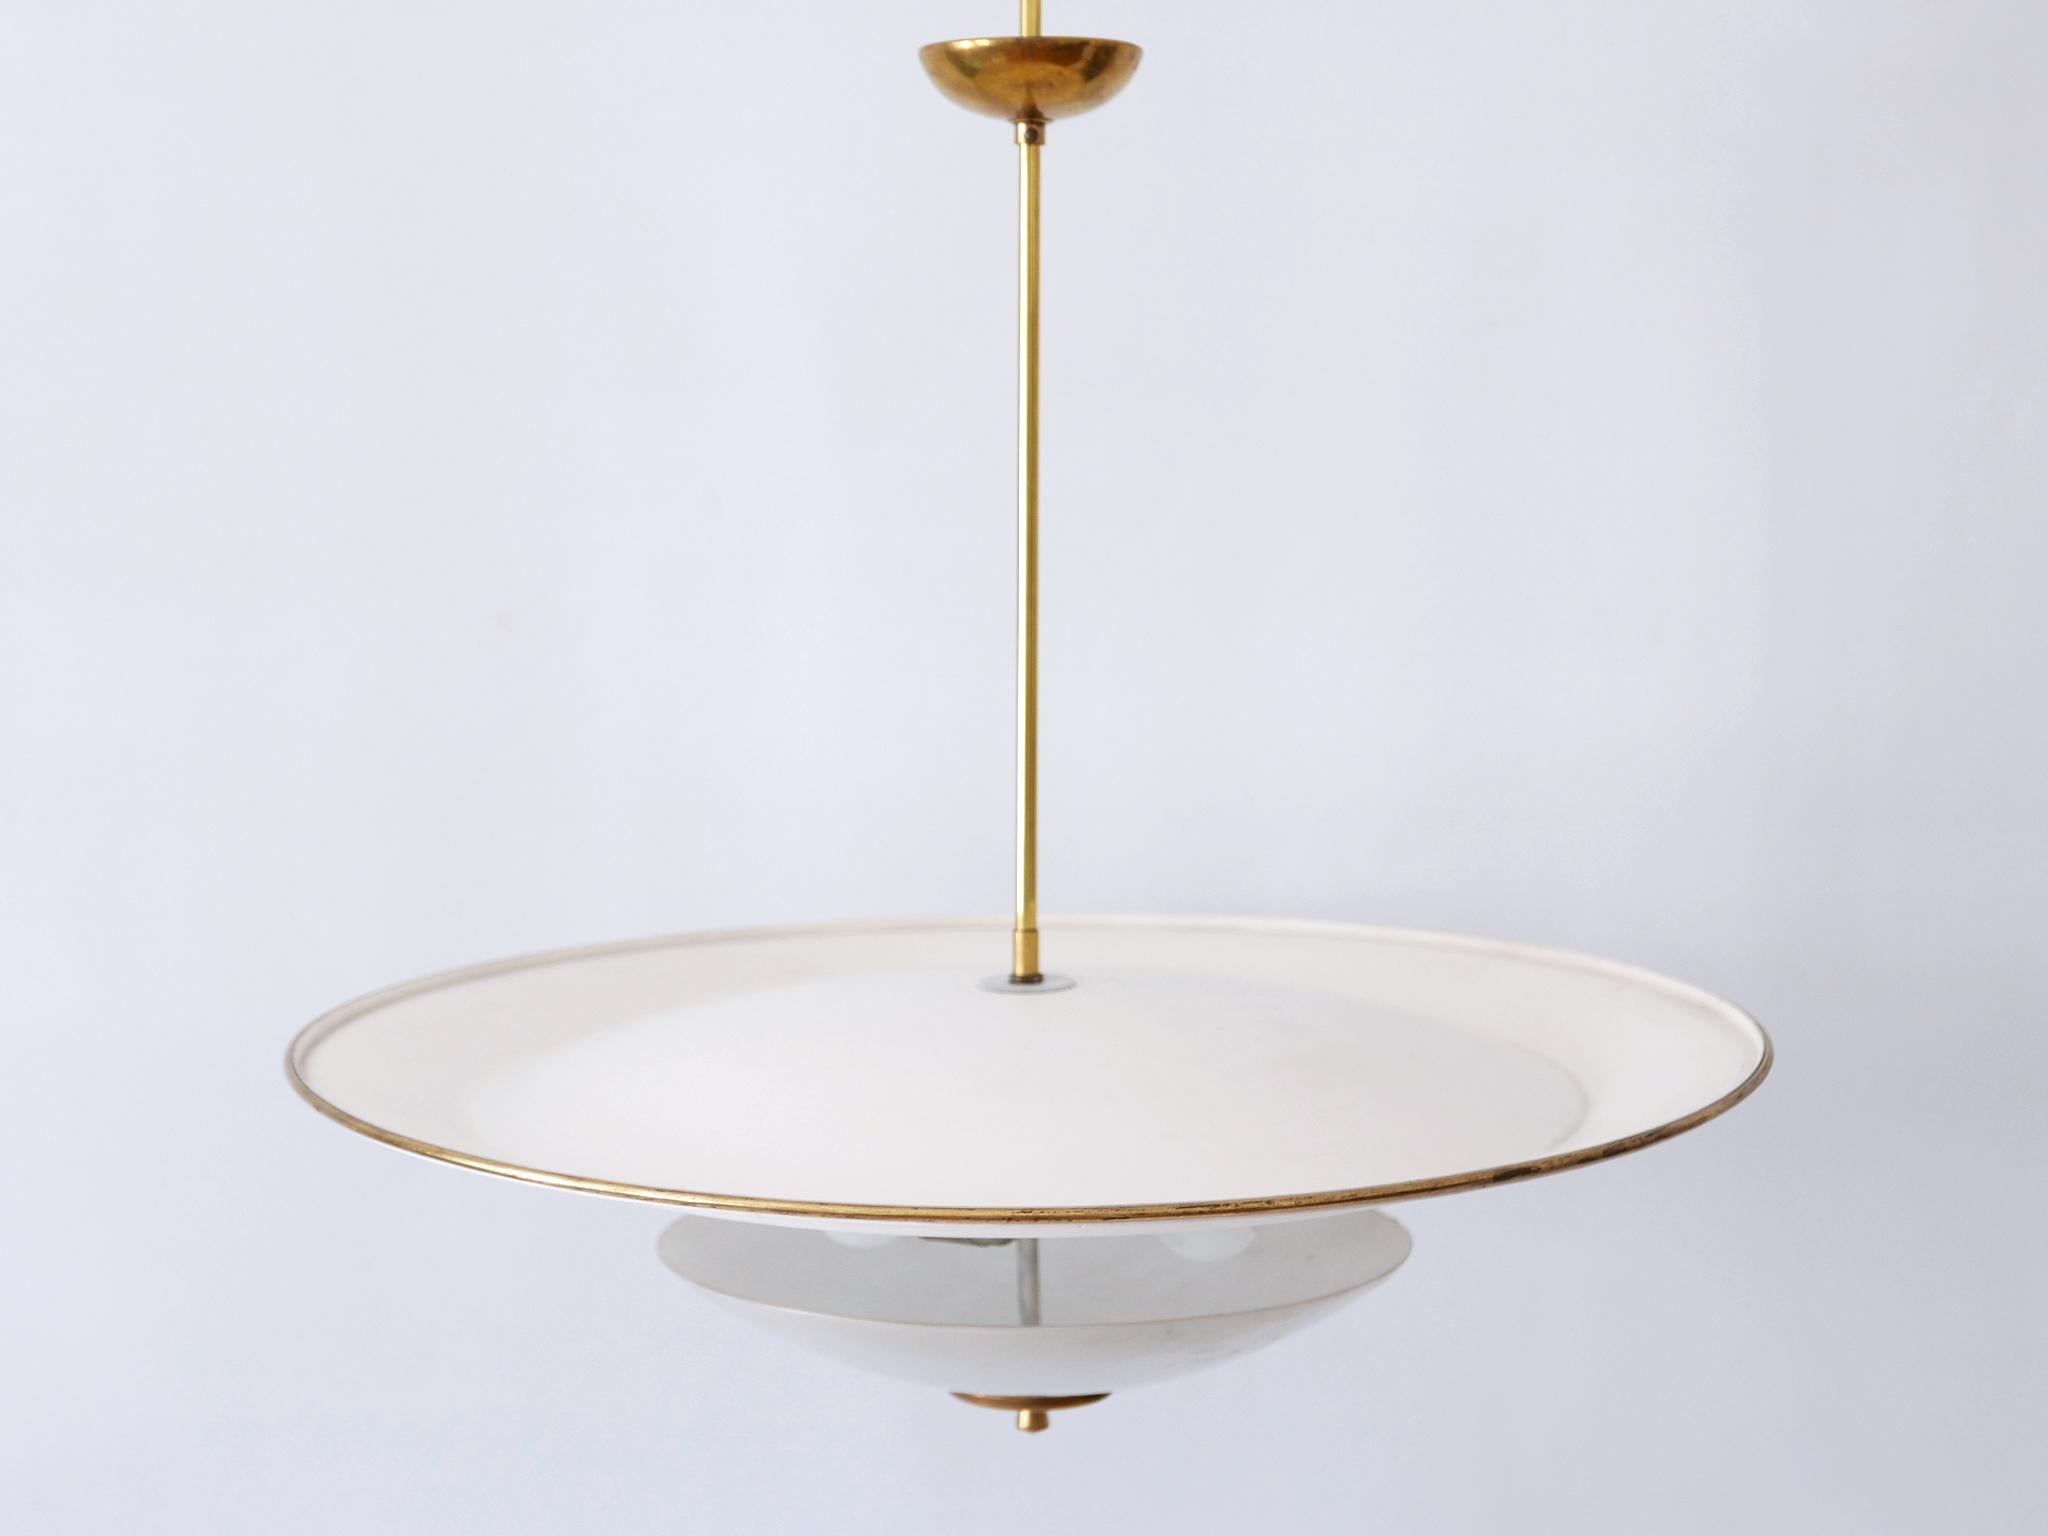 Large Mid-Century Modern 'Ufo' Ceiling Light or Pendant Lamp Germany 1950s № 2 In Good Condition For Sale In Munich, DE